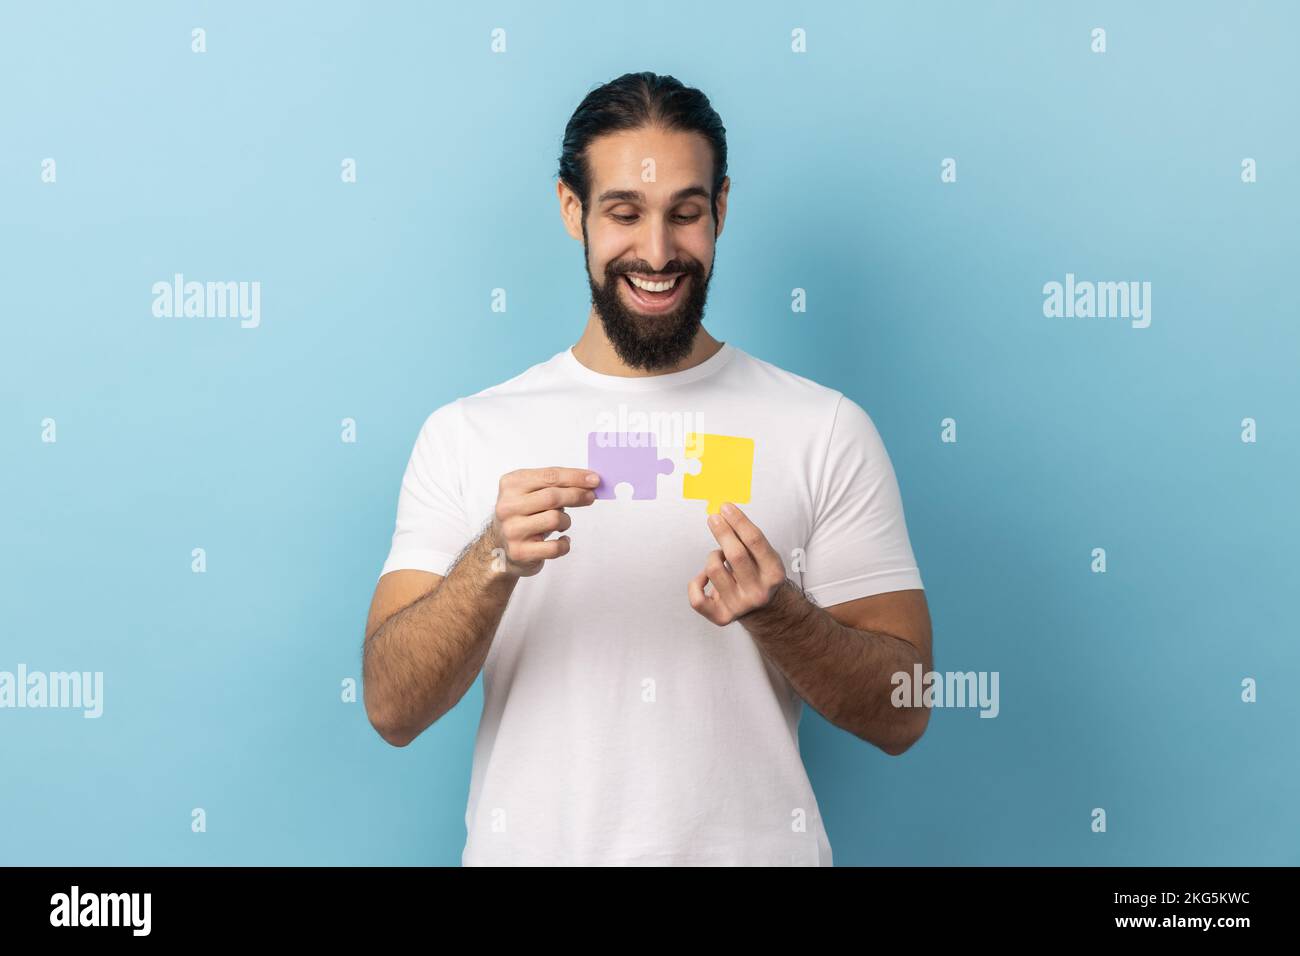 Portrait of man with beard in T-shirt holding two puzzle parts and smiling joyfully, ready to connect jigsaw pieces, symbol of union and association. Indoor studio shot isolated on blue background. Stock Photo